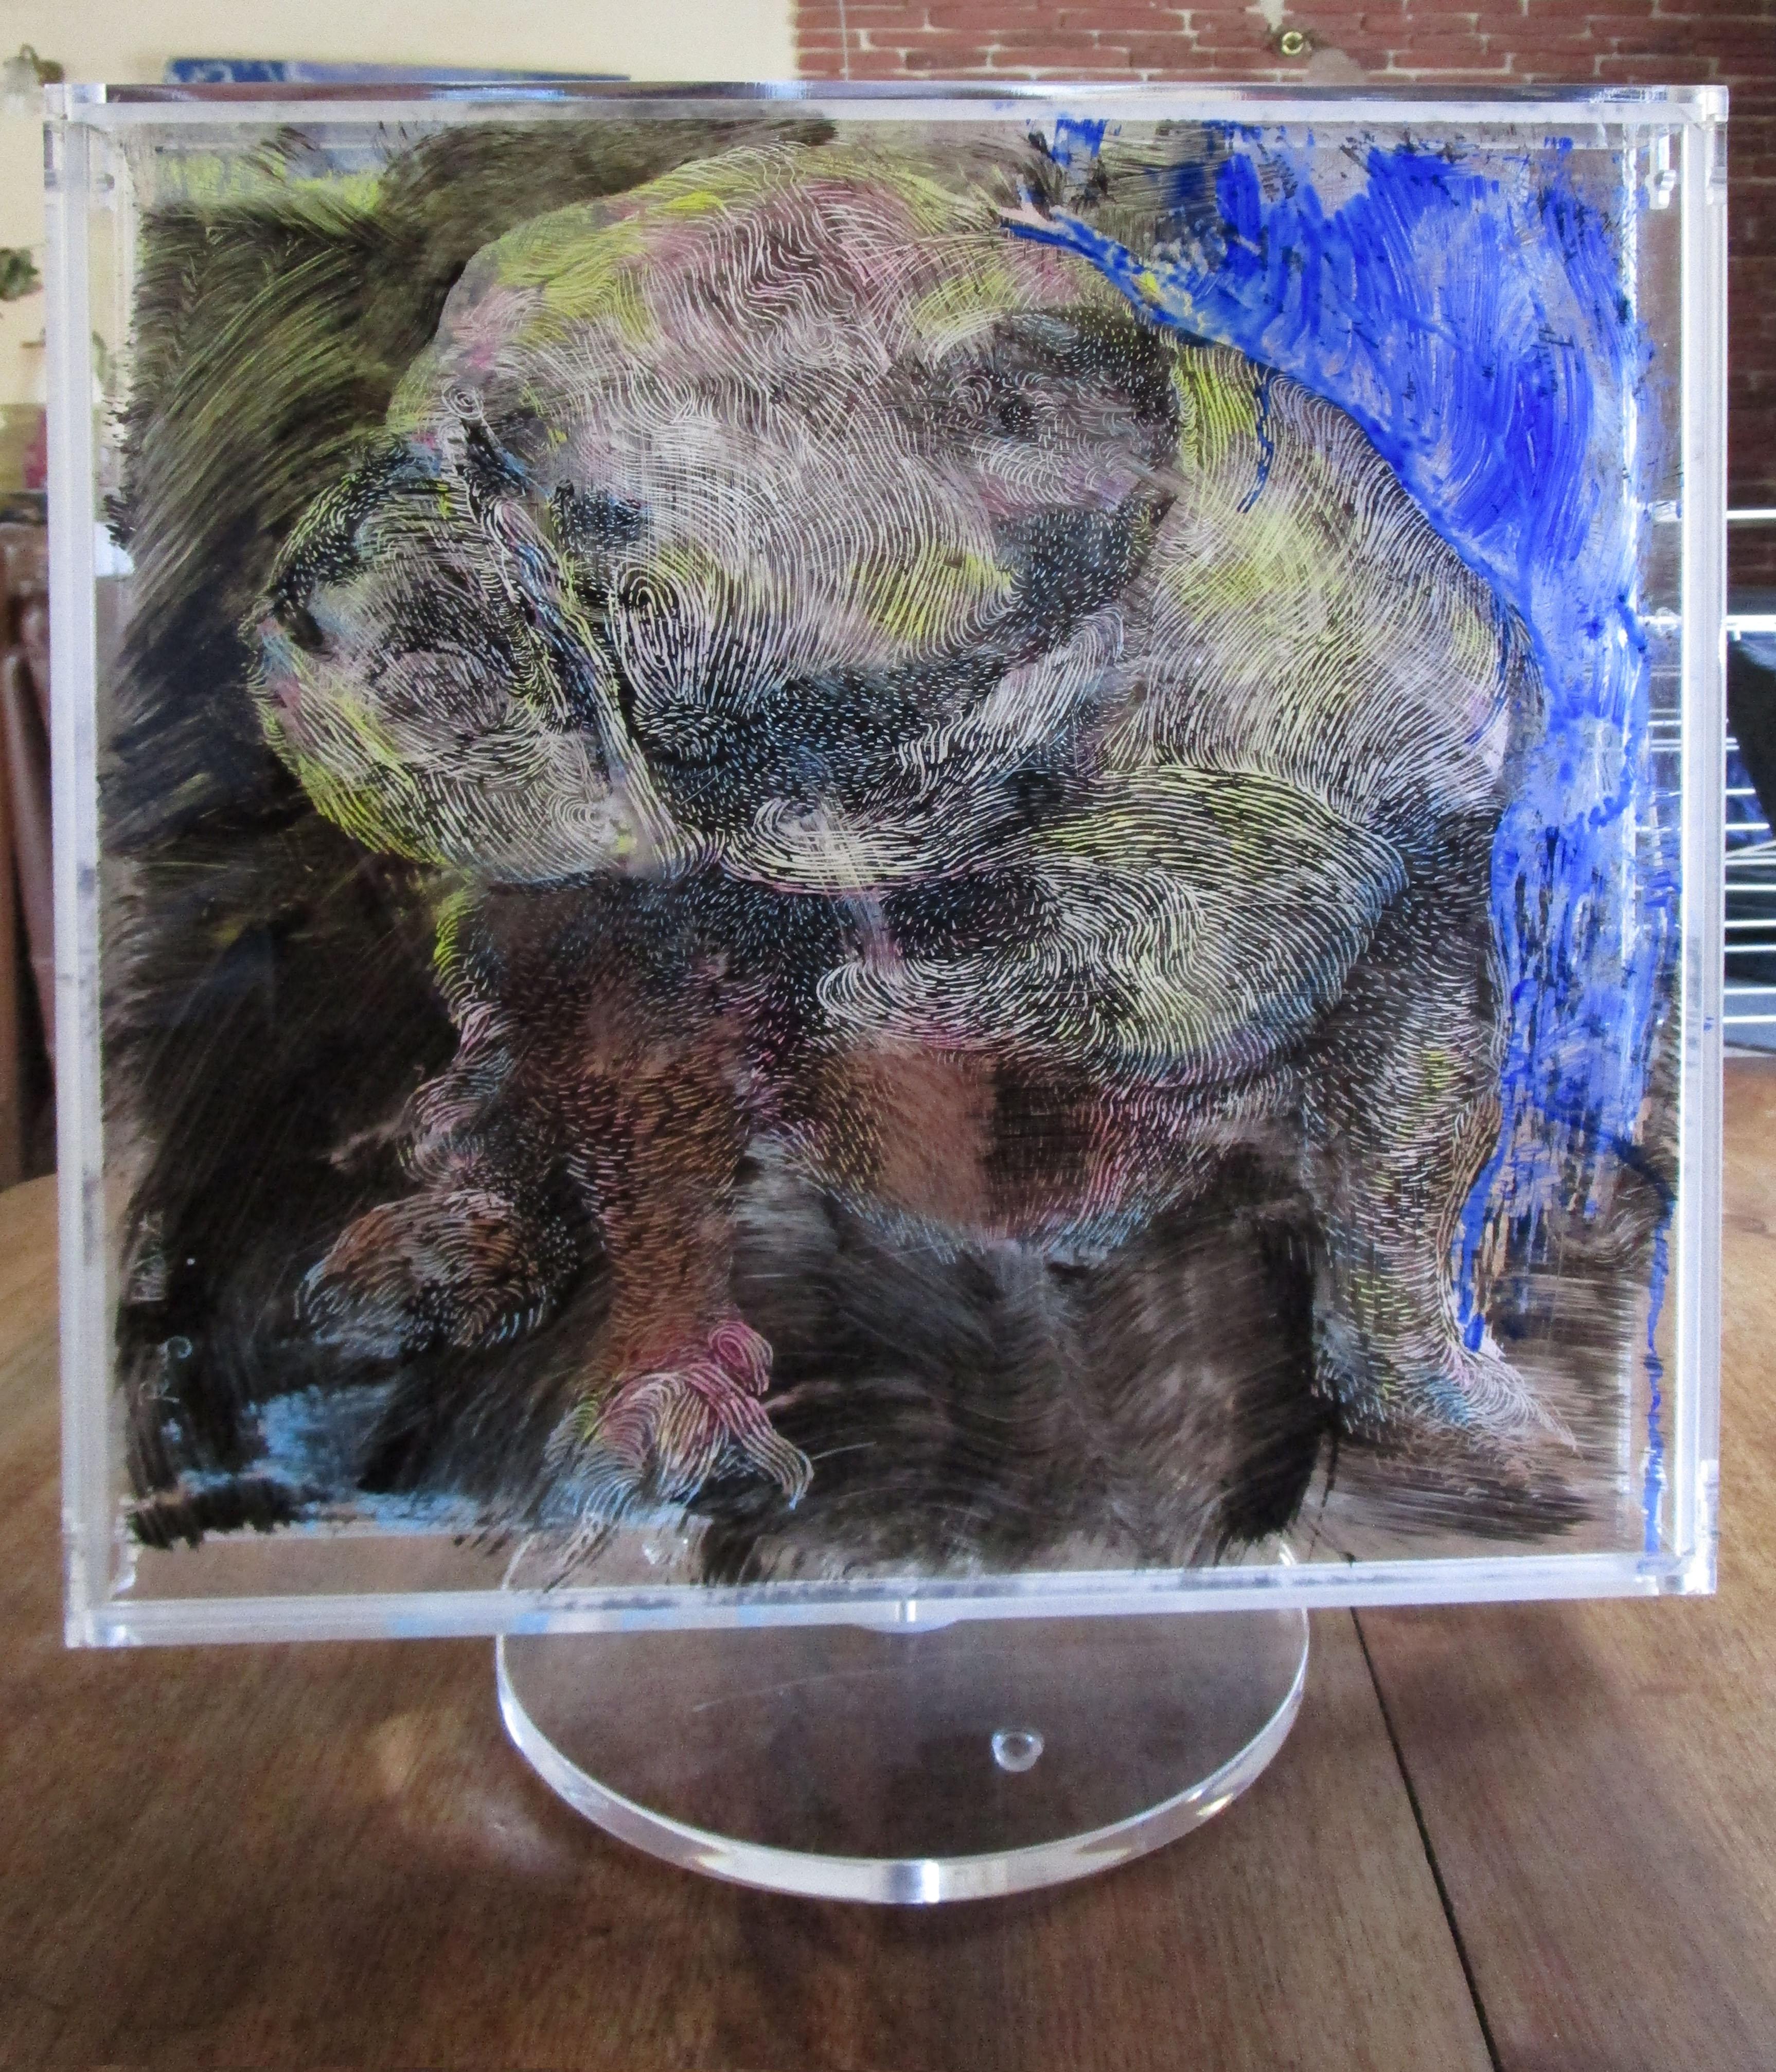 Bulldog Revolving Sculpture 3D Painting on Lucite Your Pet Commission Undertaken - Kinetic Mixed Media Art by Perez Petriarte